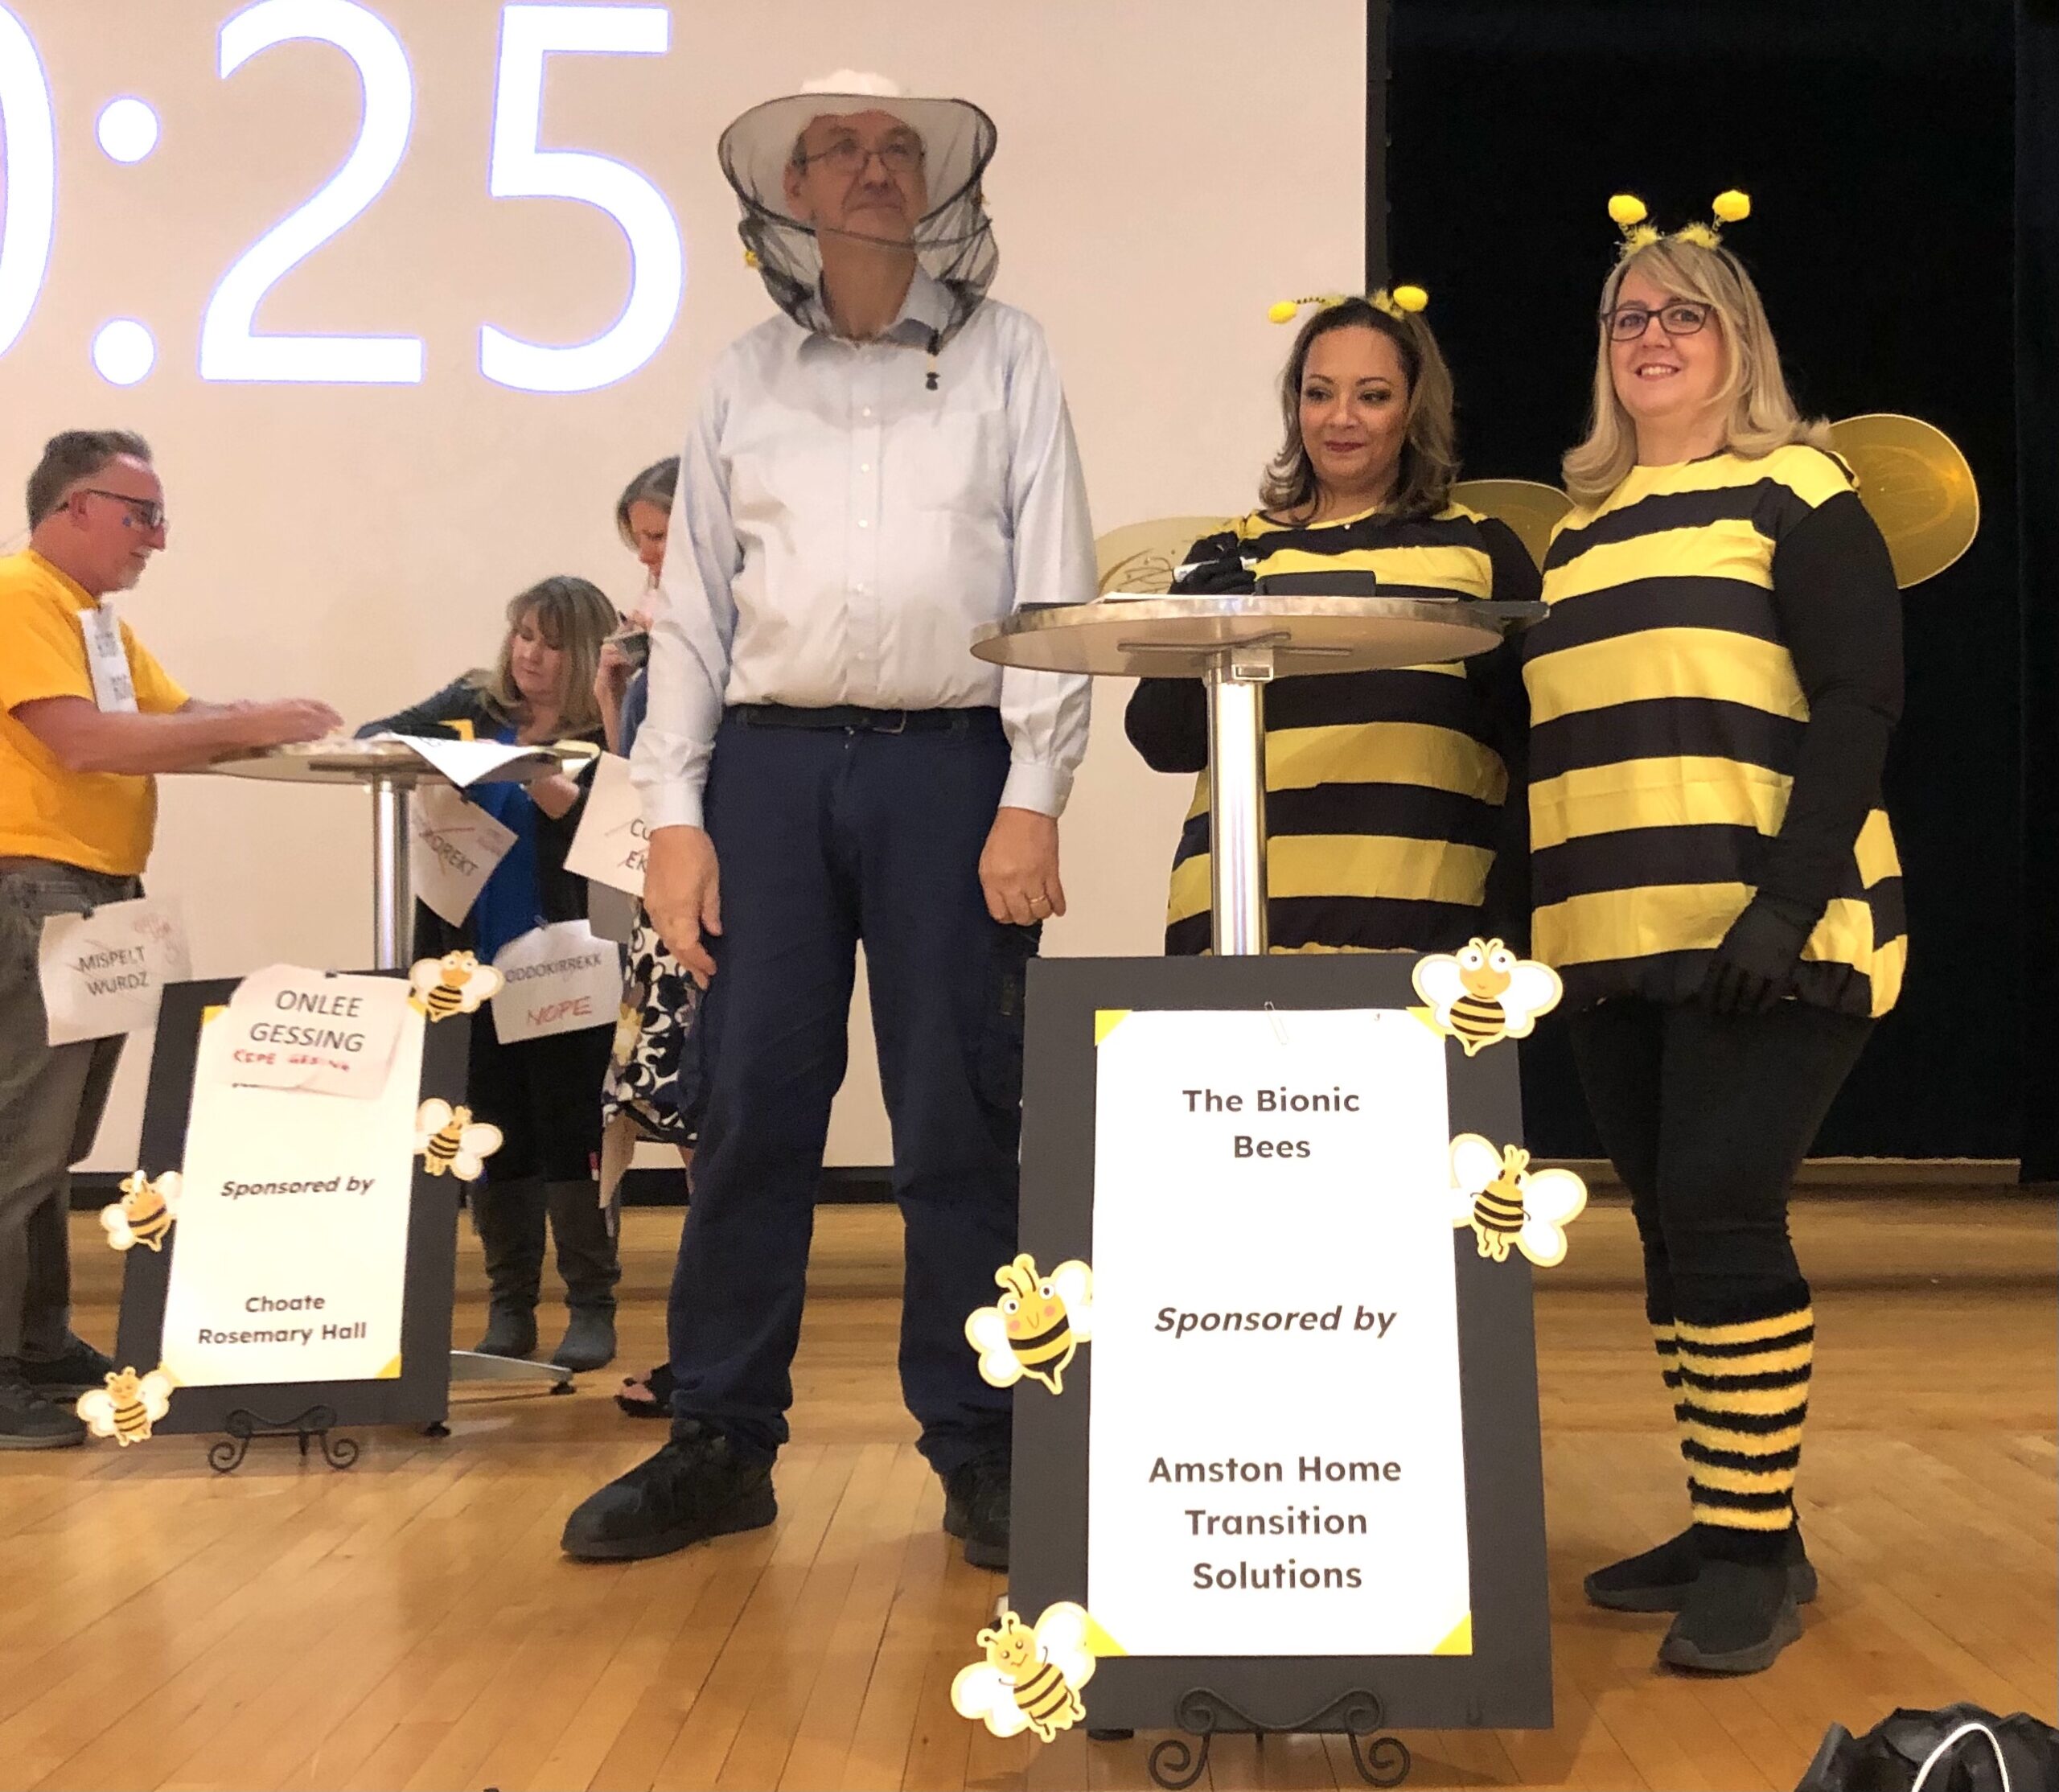 One of the many teams that participated in the Spelling Bee Team Challenge.